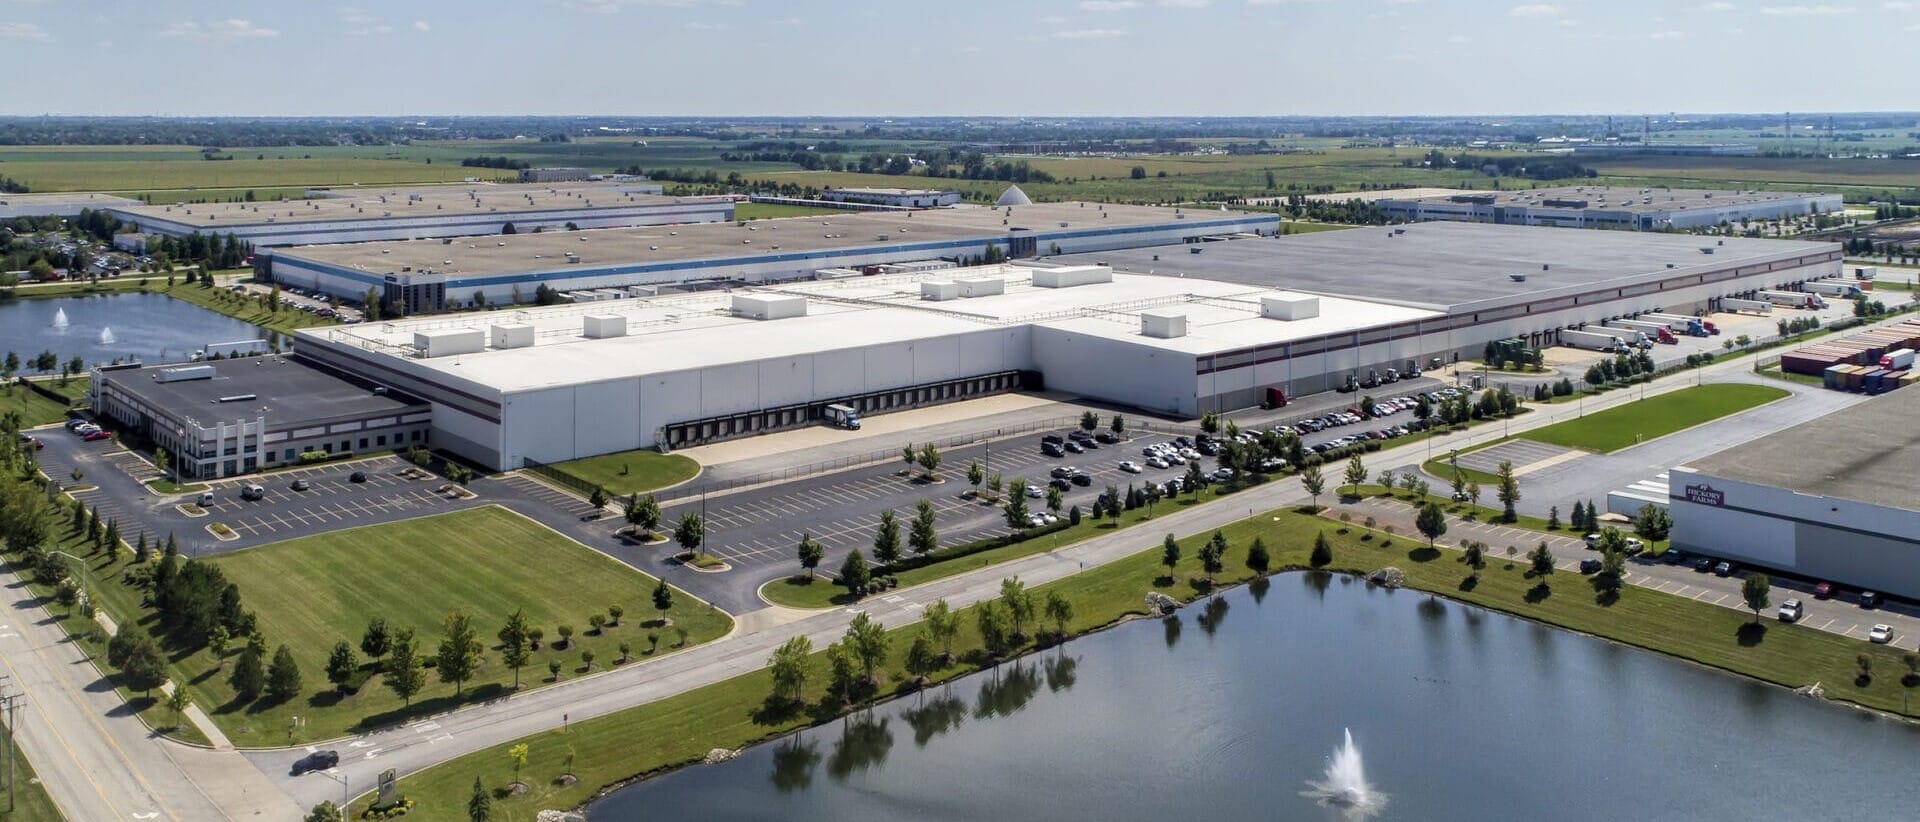 Aerial view of a large industrial park with multiple warehouses, parking spaces, and a pond with a fountain, specializing in single tenant net leased investments nationwide.